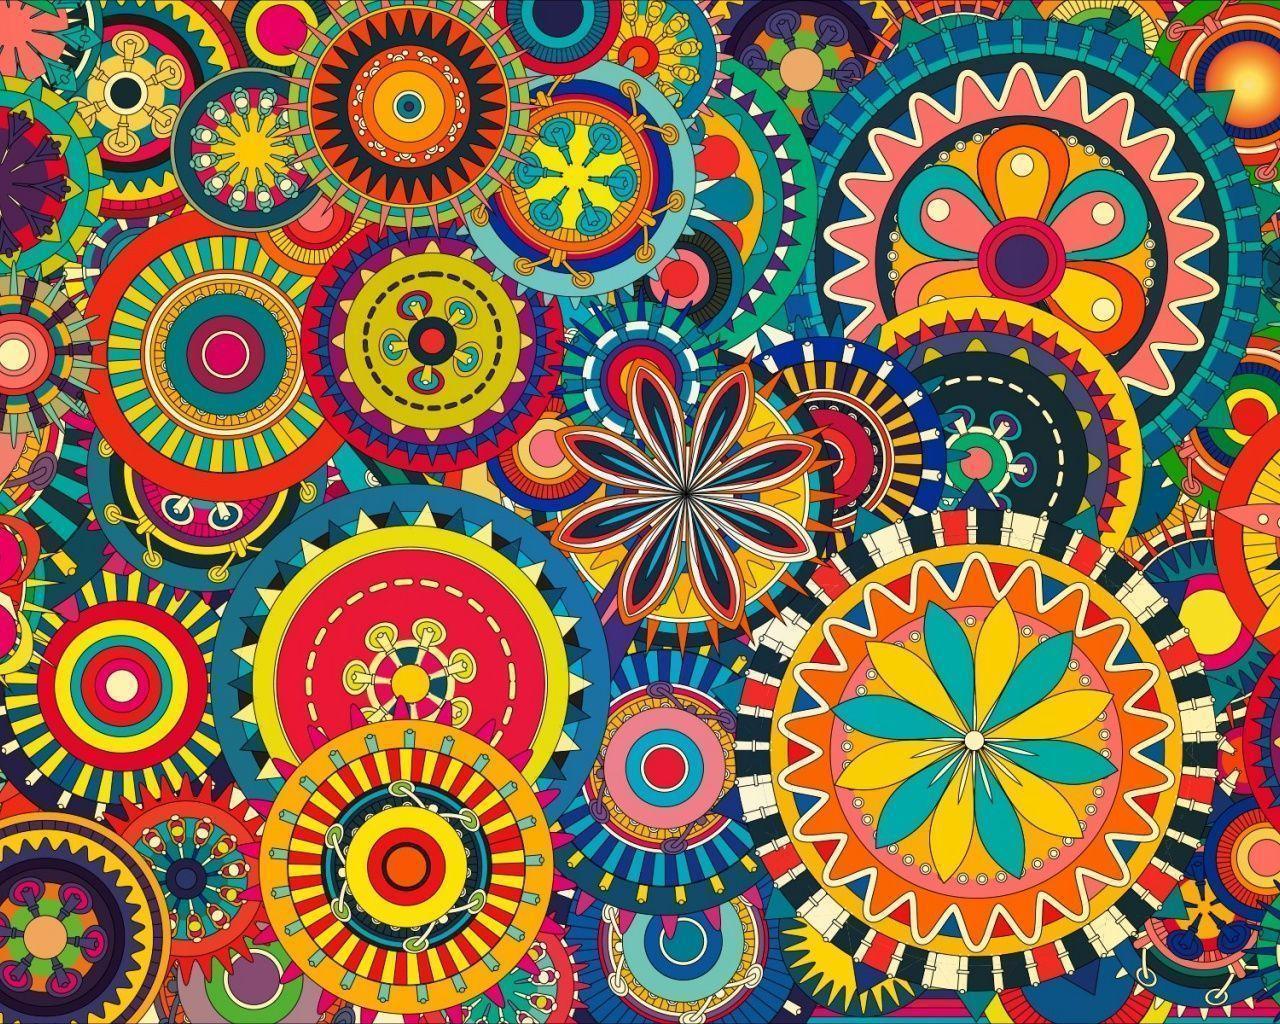 Multicolored Floral Shapes desktop PC and Mac wallpaper